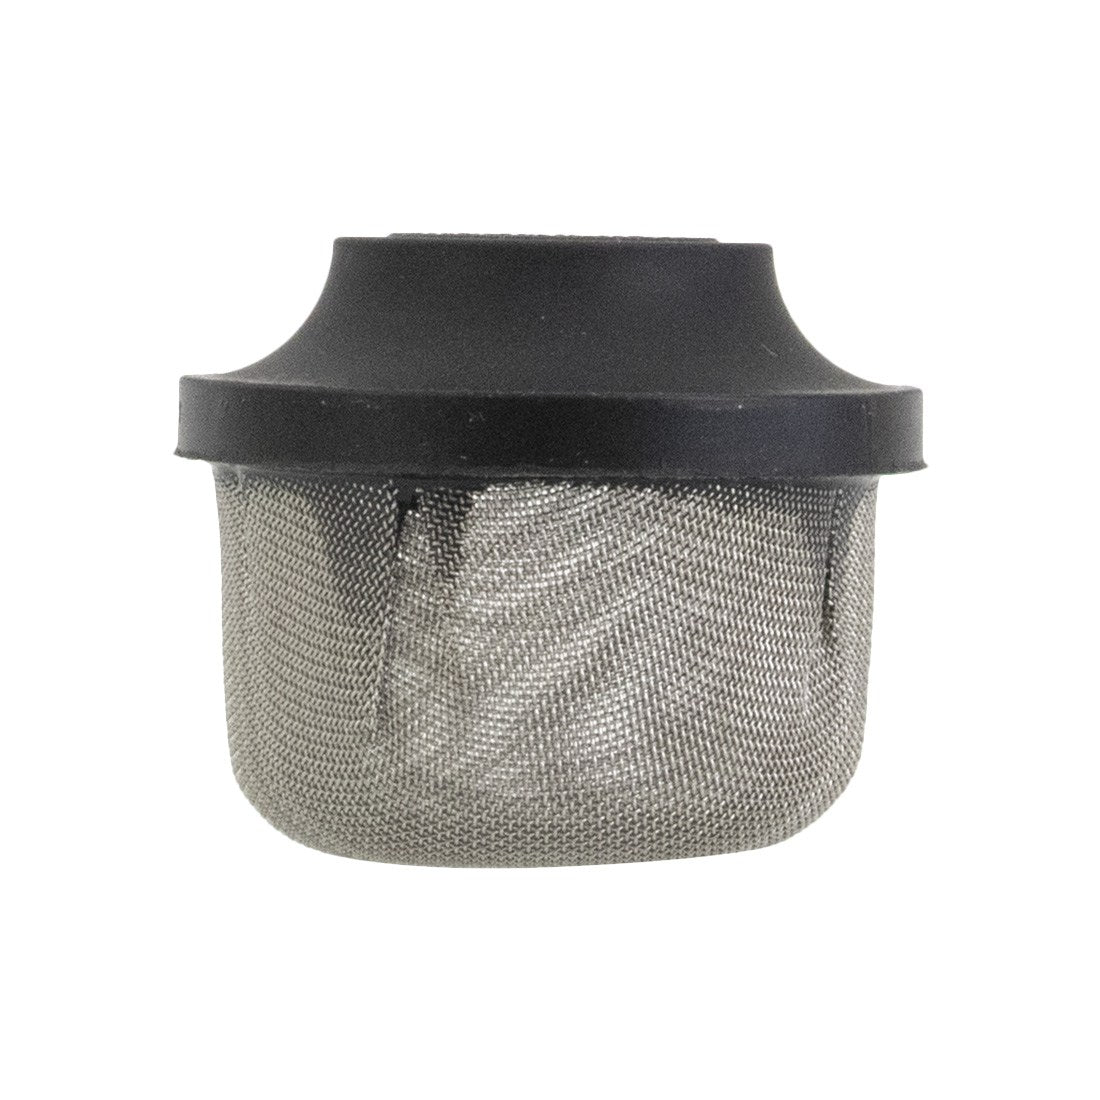 X-Jet Ball Strainer Tank Screen - 1/2 Inch - Front View